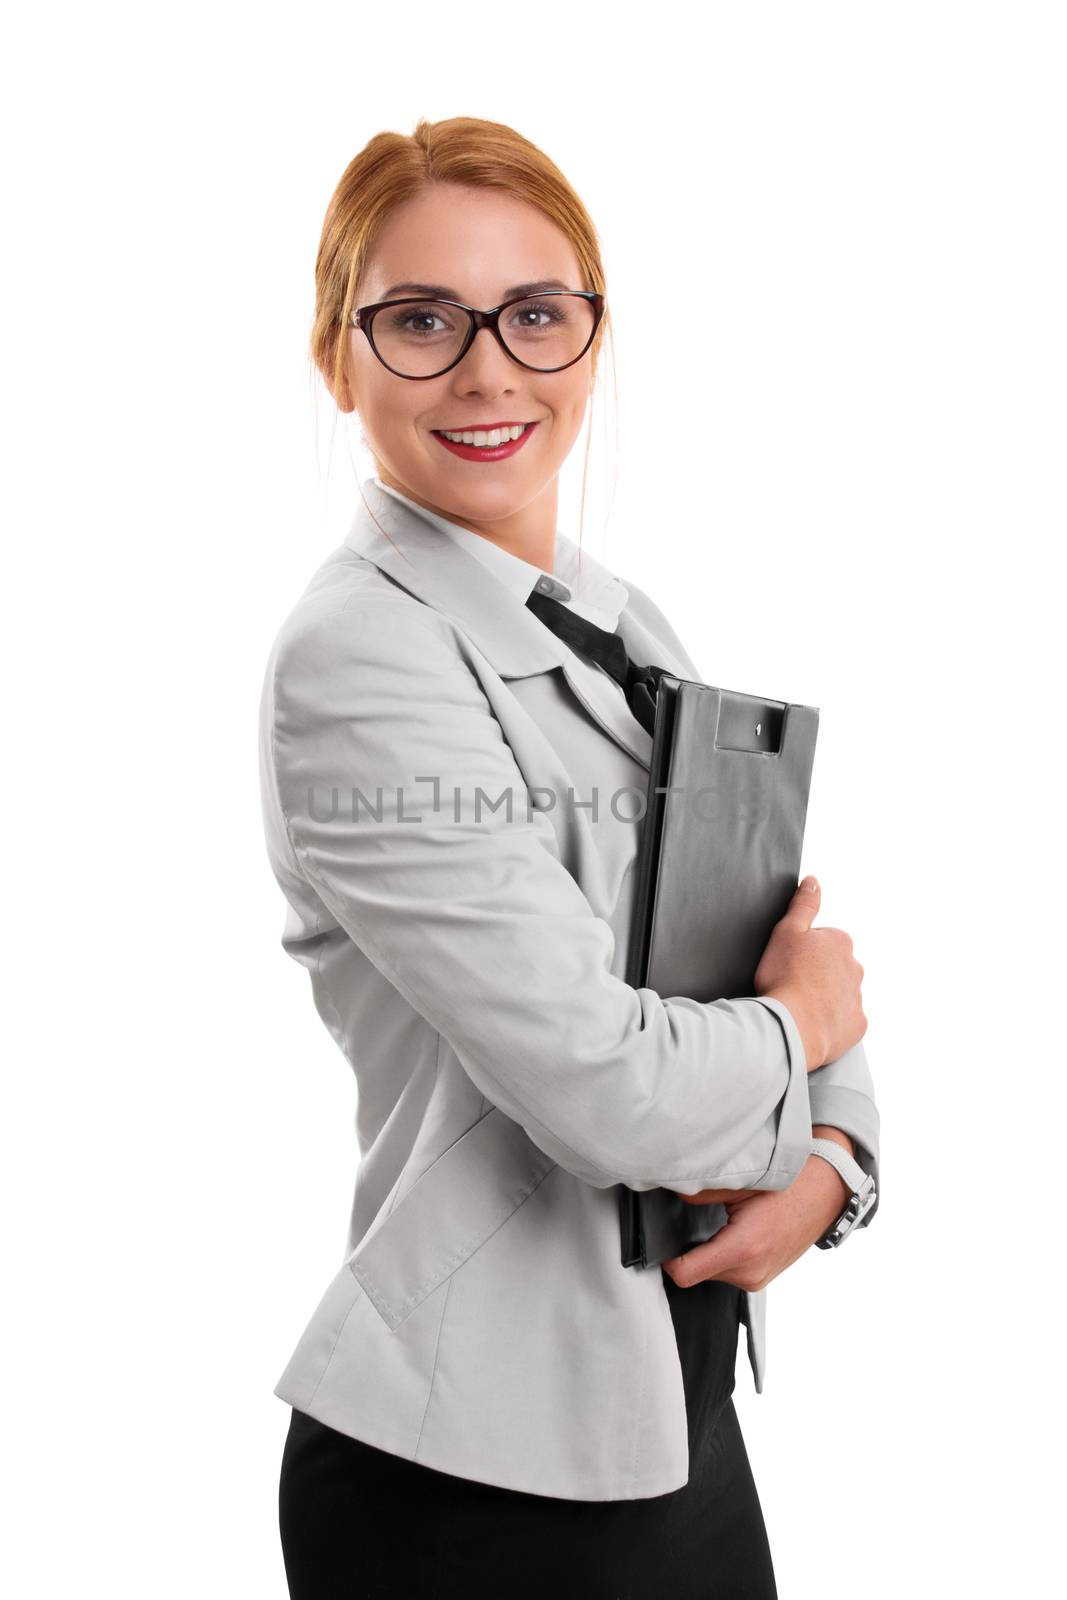 Portrait of a beautiful smiling young fashionable businesswoman holding a clipboard, isolated on white background.